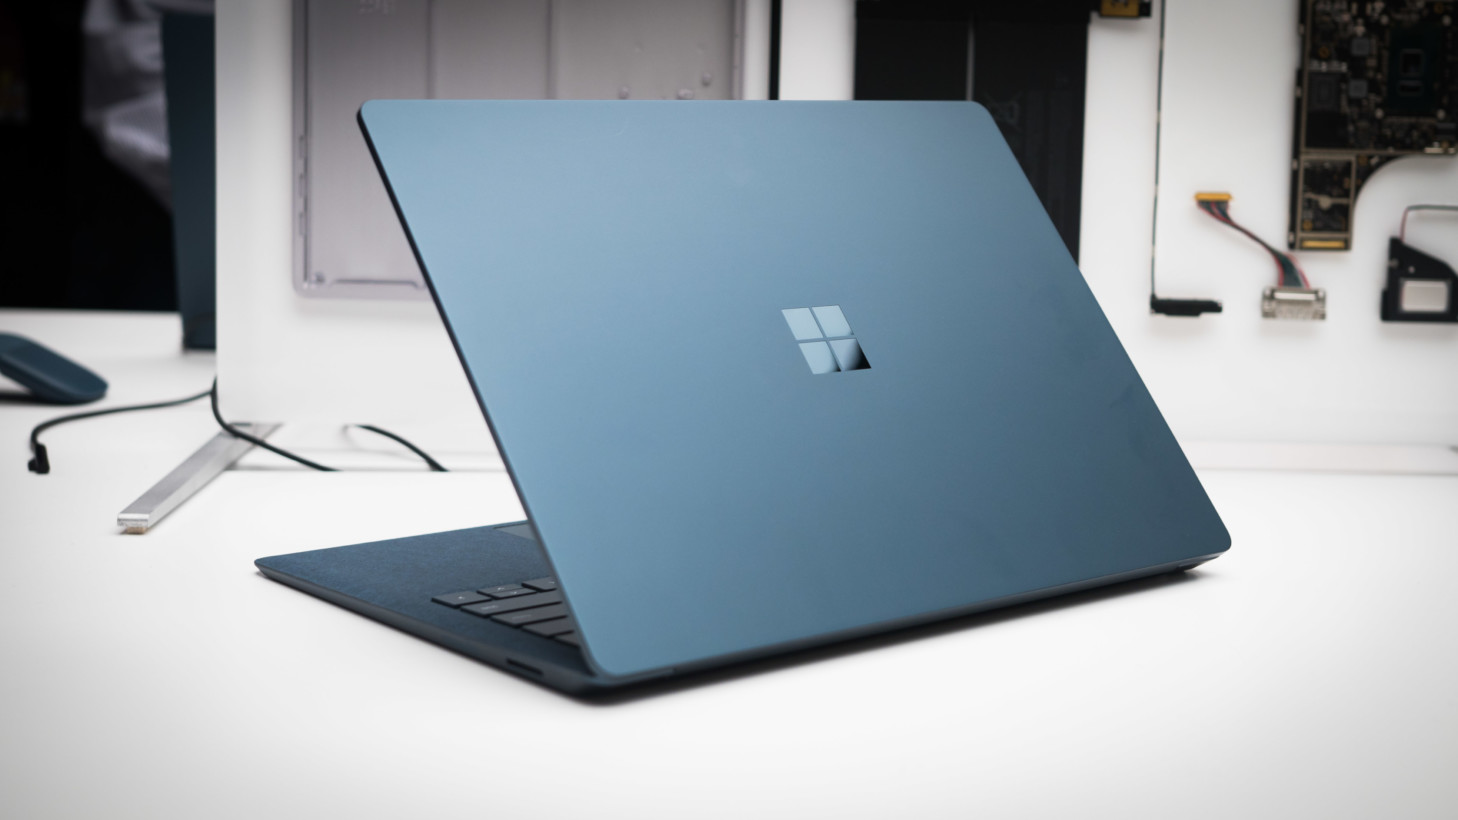 Weekly Roundup: Surface Laptop Hands-On, YouTube New Slick Design and More